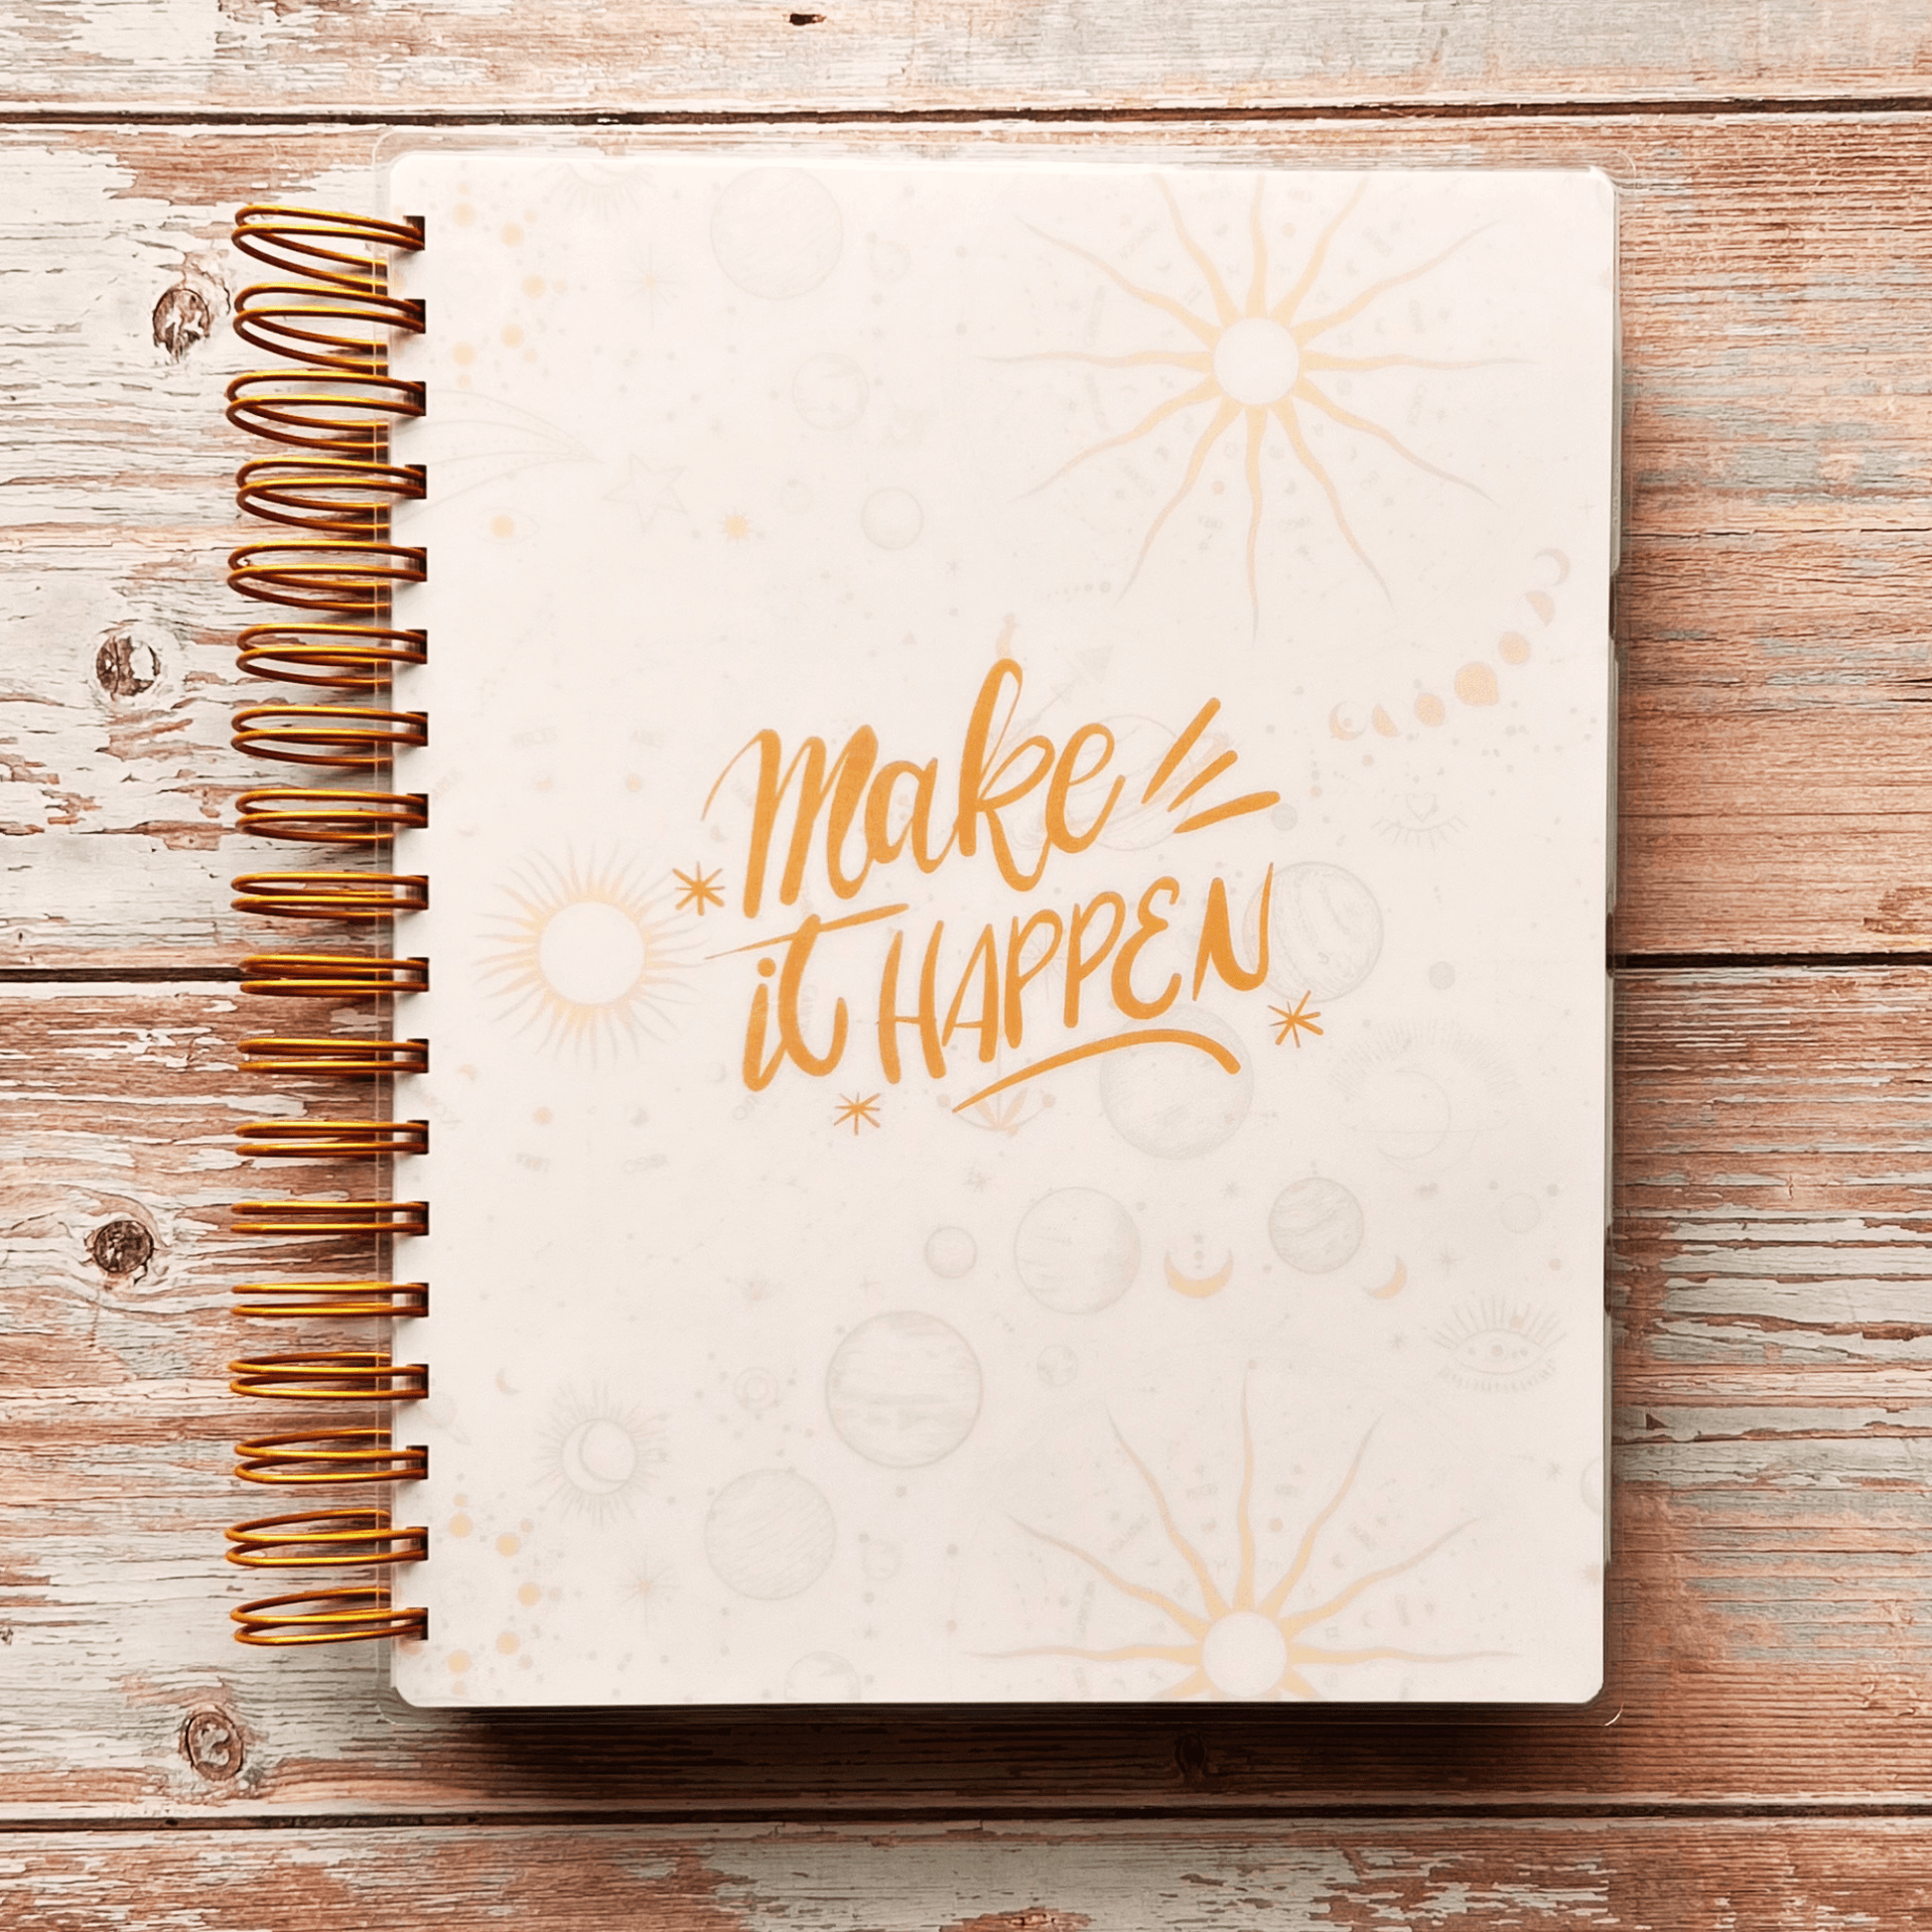 2023-2024 Personalized Monthly Planner - Make It Happen Monthly Planners Artful Planner Co. July-2023 20 Meal Planner Pages added to back +$3.00 